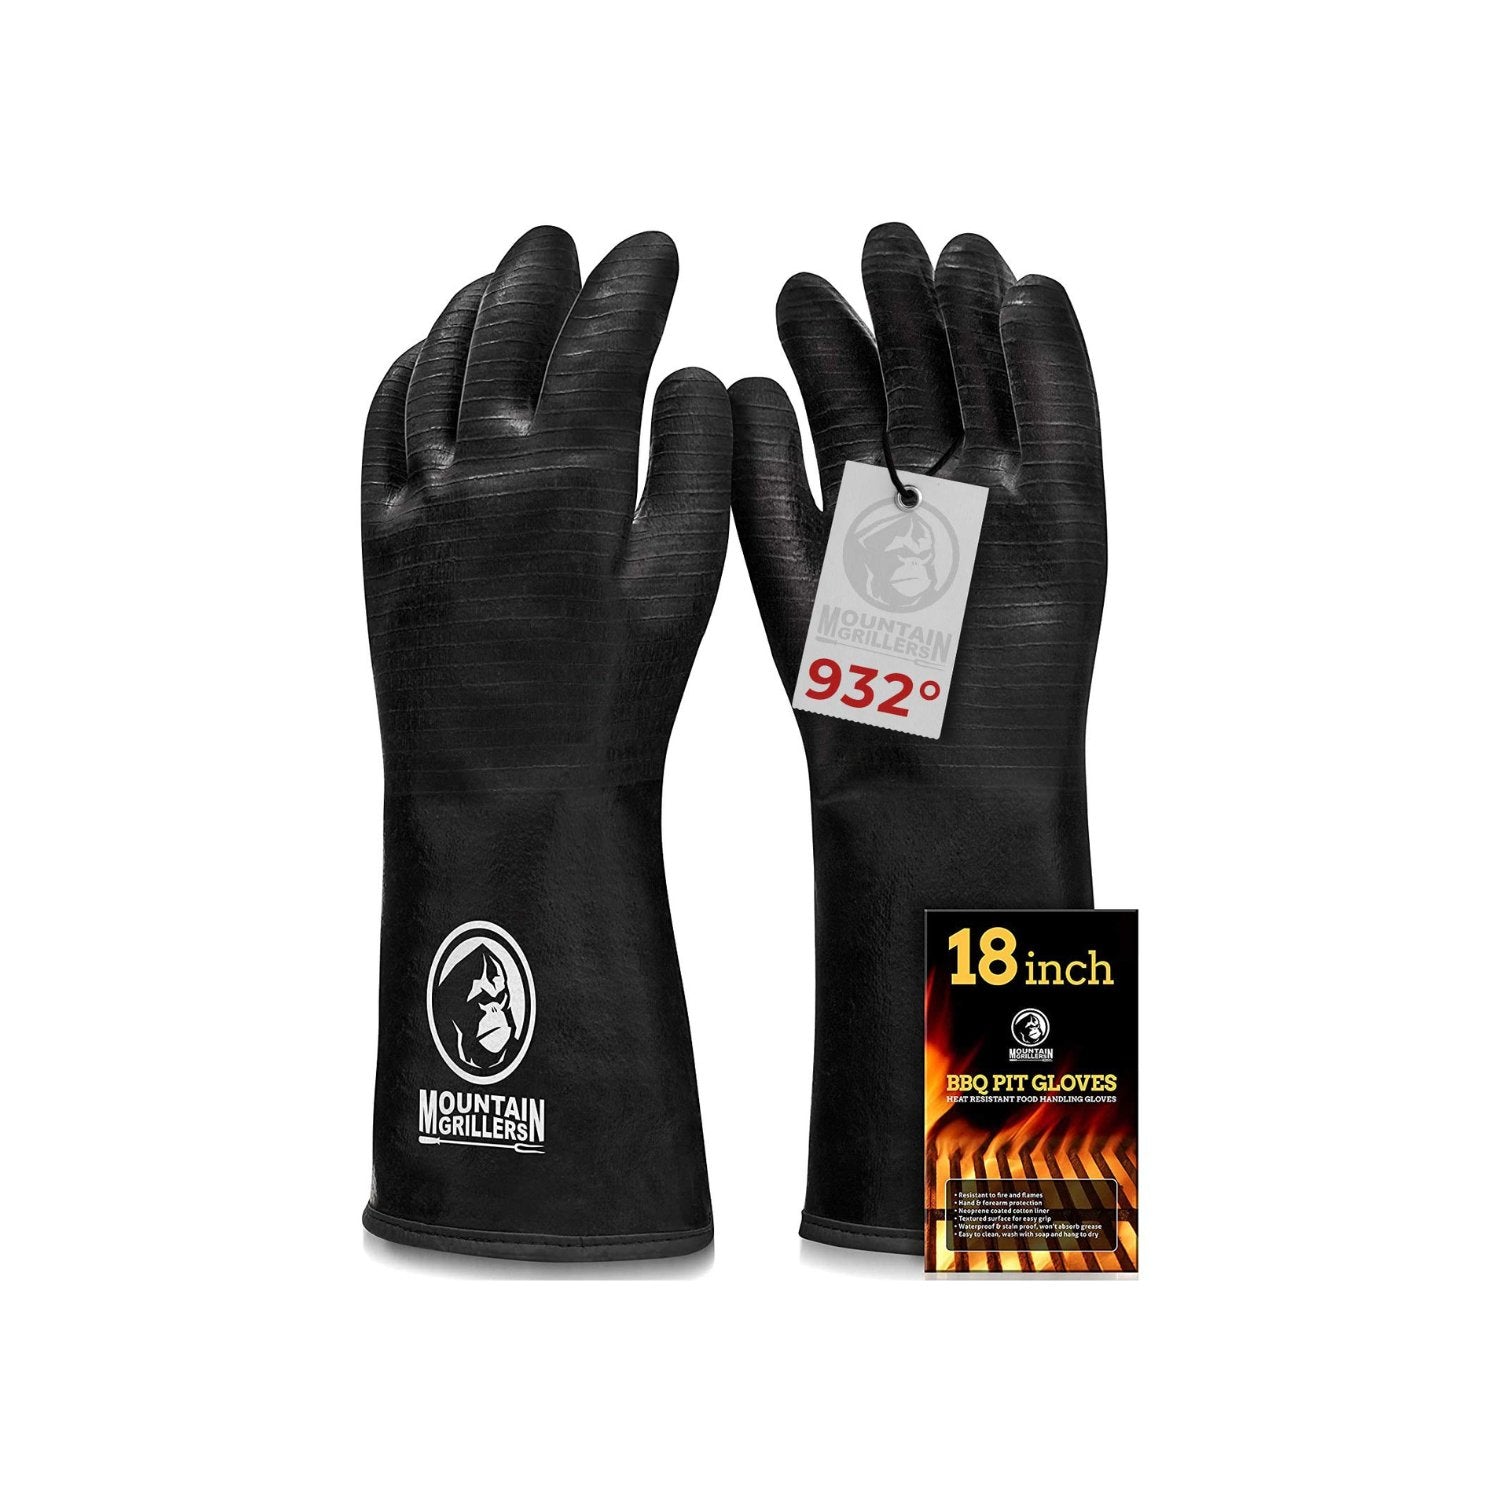 Extreme Heat Resistant Gloves For Grill BBQ - High Temperature Fire Pit Grill Gloves